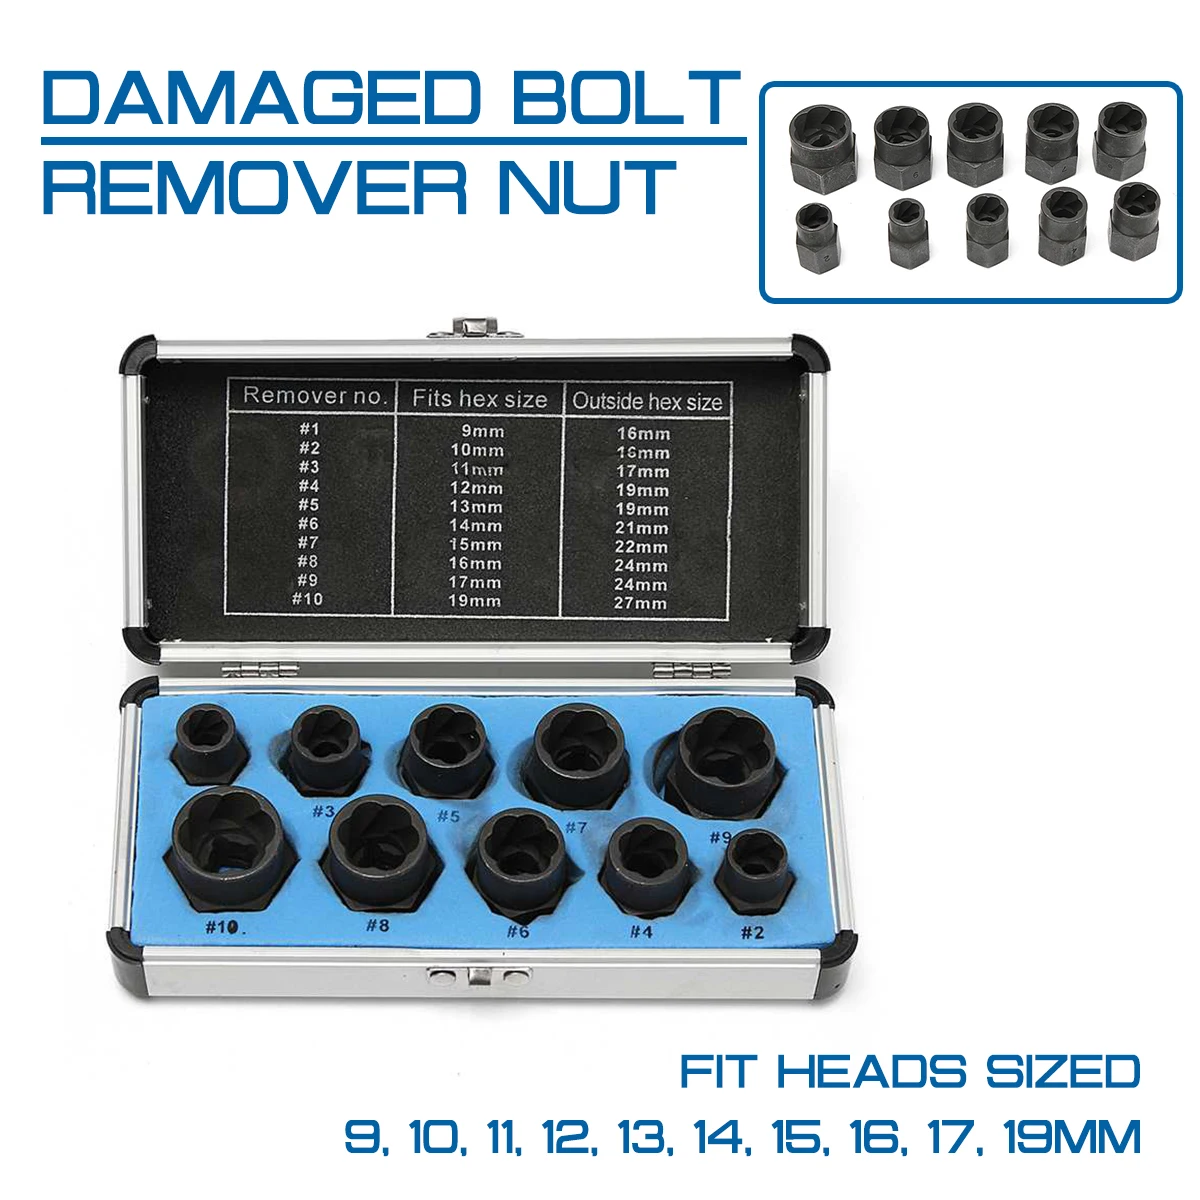 

10 pcs/set Damaged Bolt Nut Screw Remover Extractor Removal Set Threading Hand Tools Kit Nut Removal Socket Tool With Box Cased